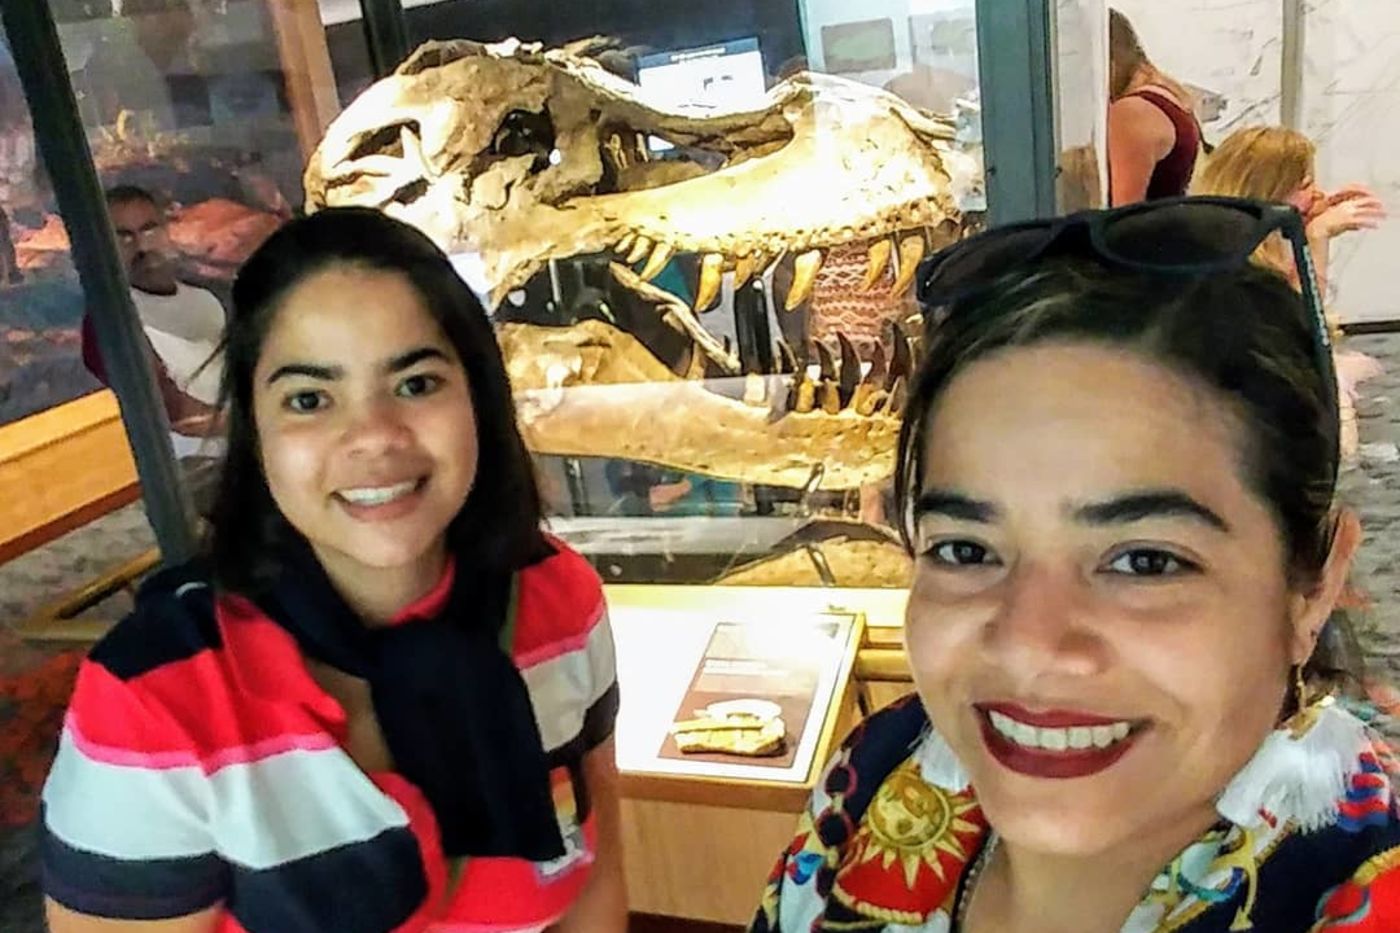 Media for Visiting SUE the T. rex: What to Know Before You Go